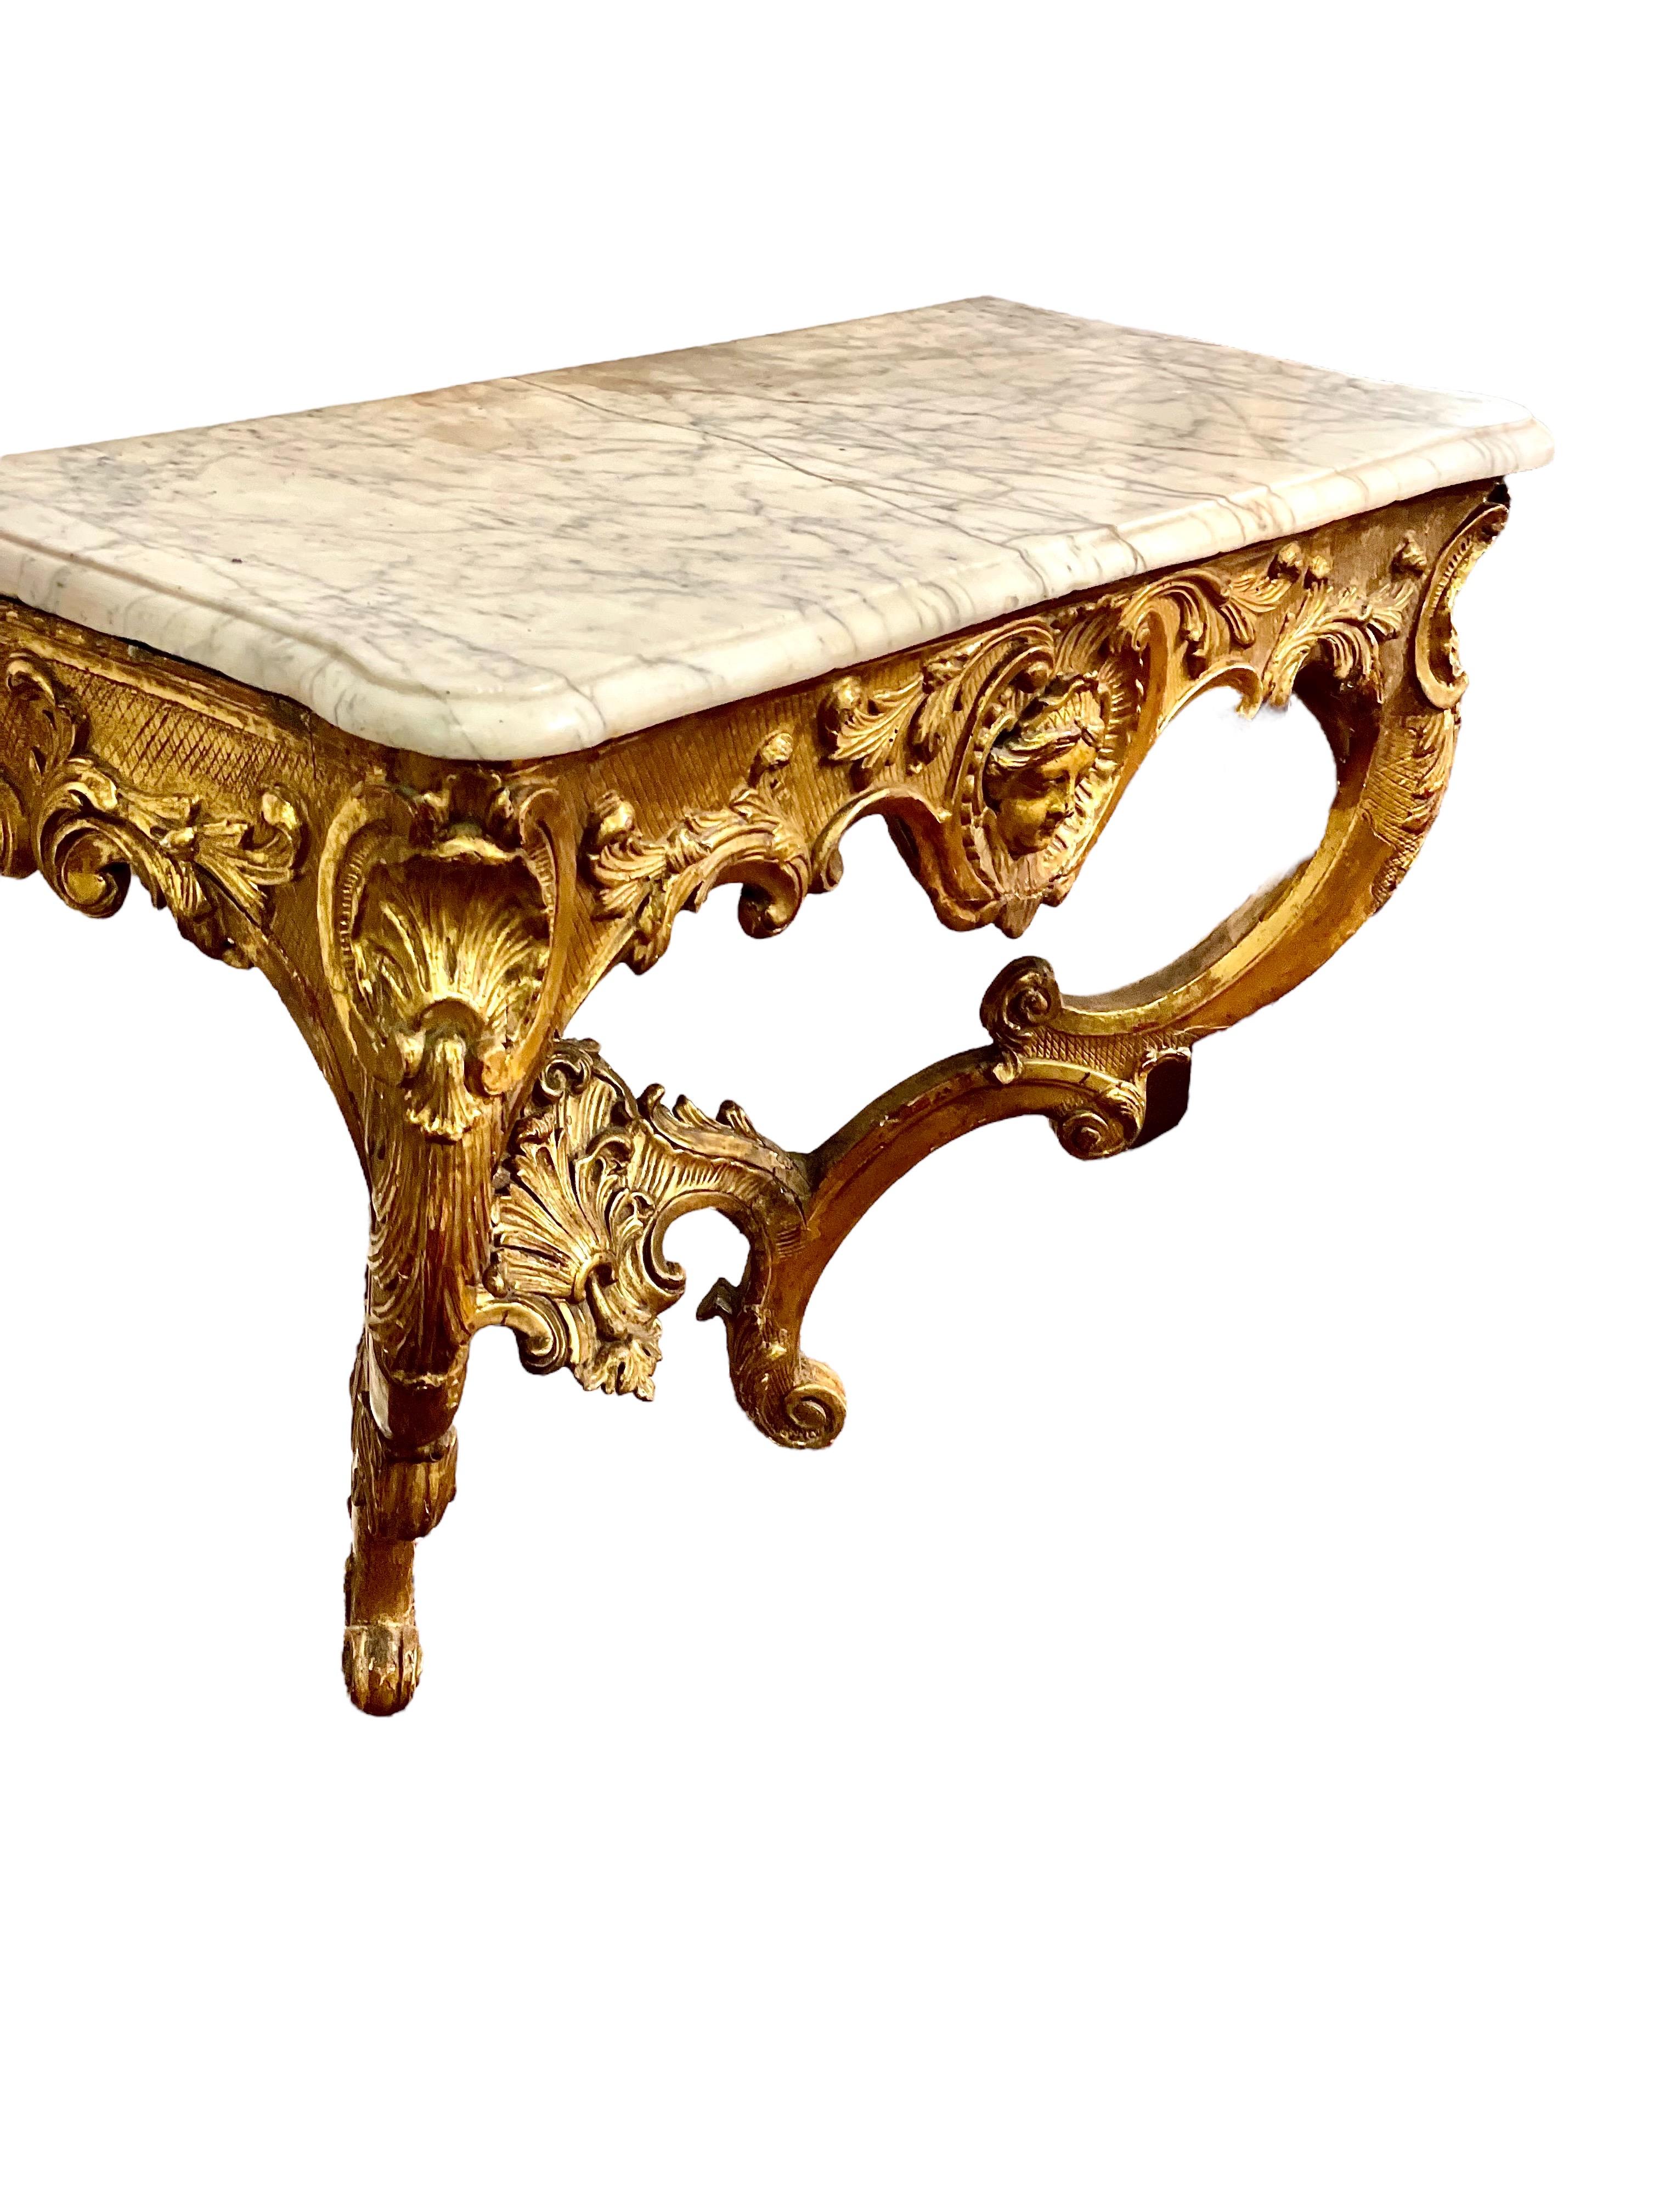 1730s Louis XV Period French Giltwood Console Table  For Sale 2